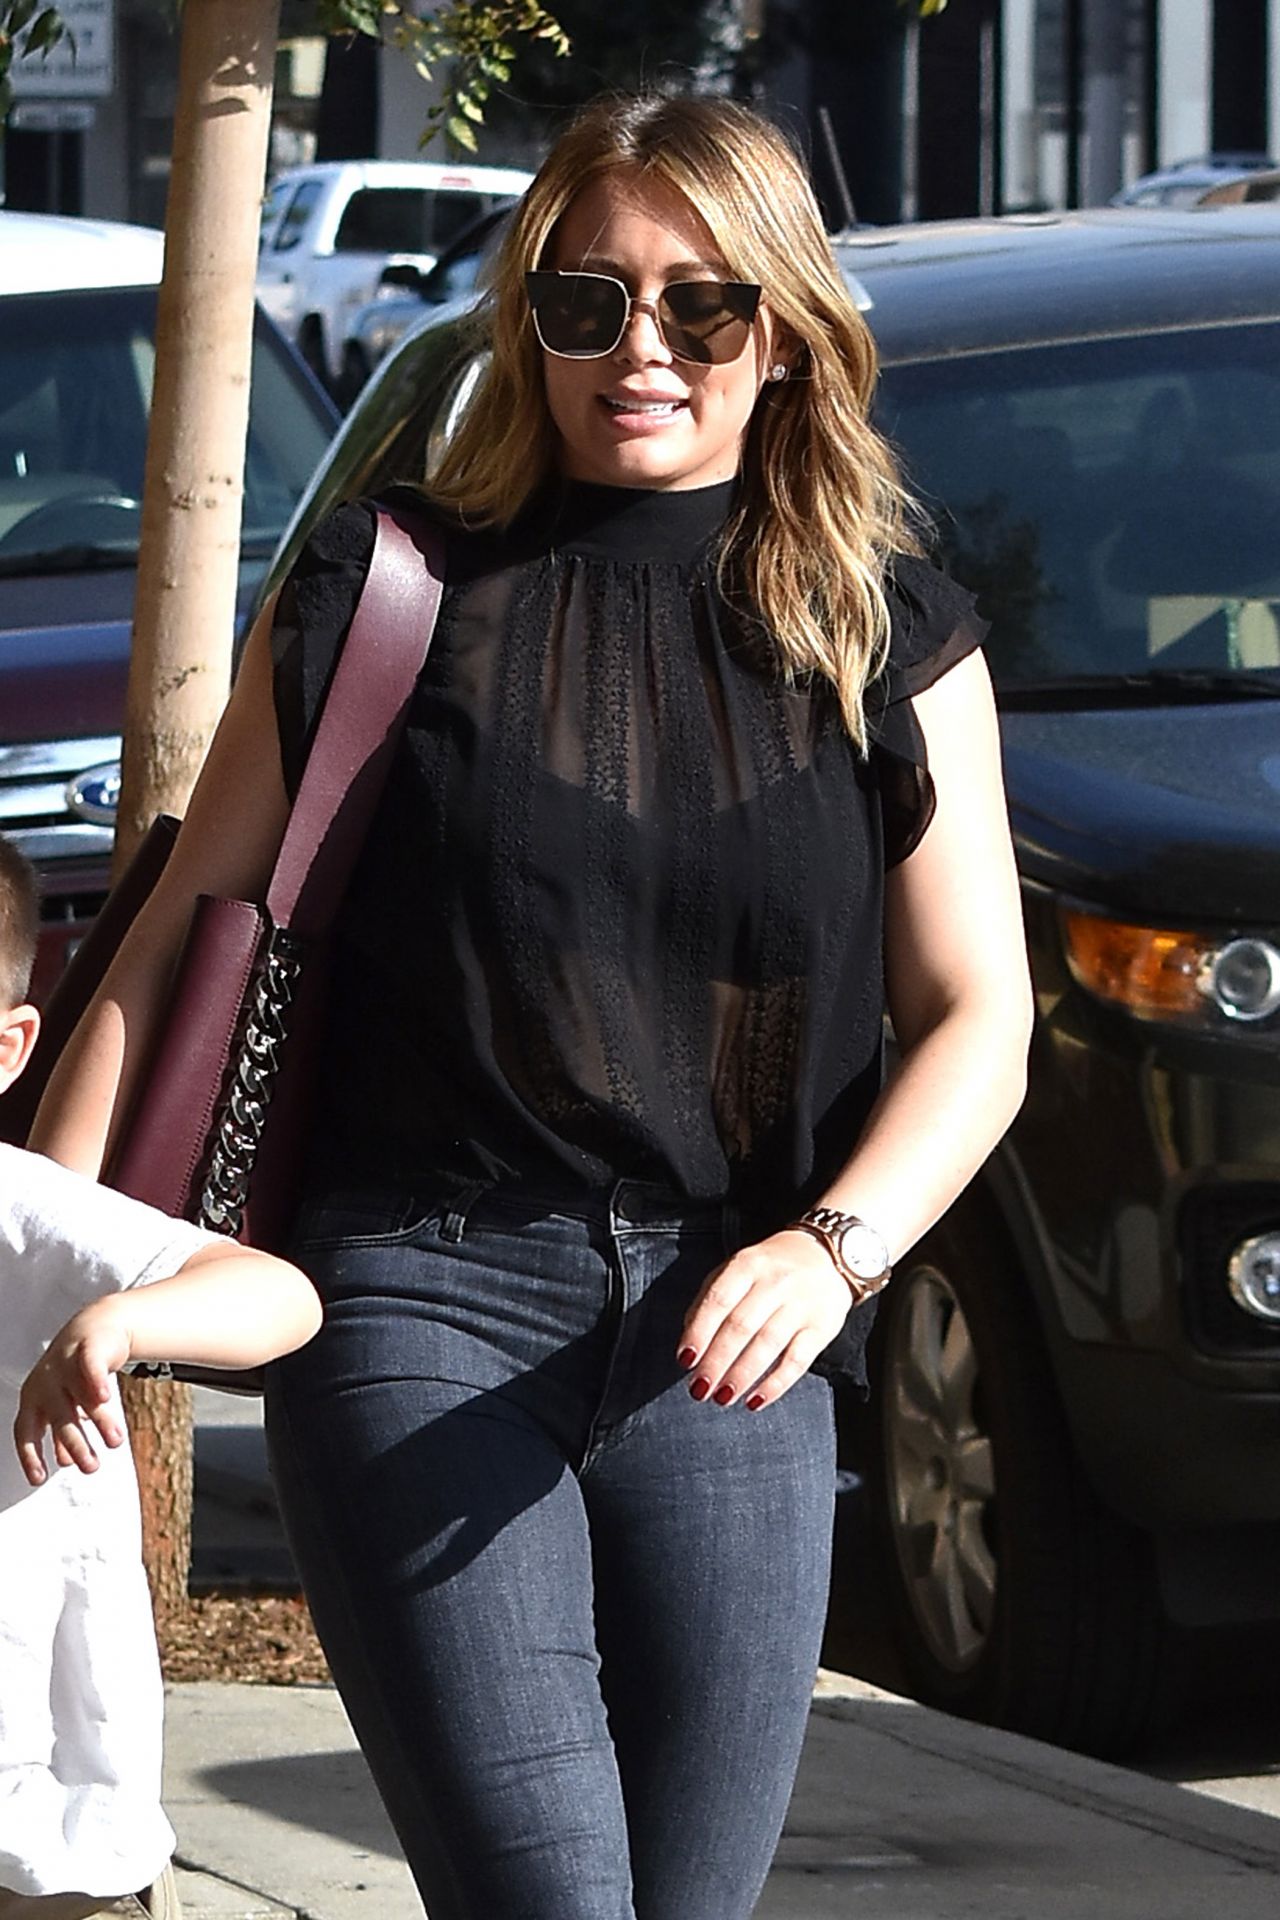 Hilary Duff In A Black Sheer Top And Tight Jeans Los Angeles 11172017 • Celebmafia